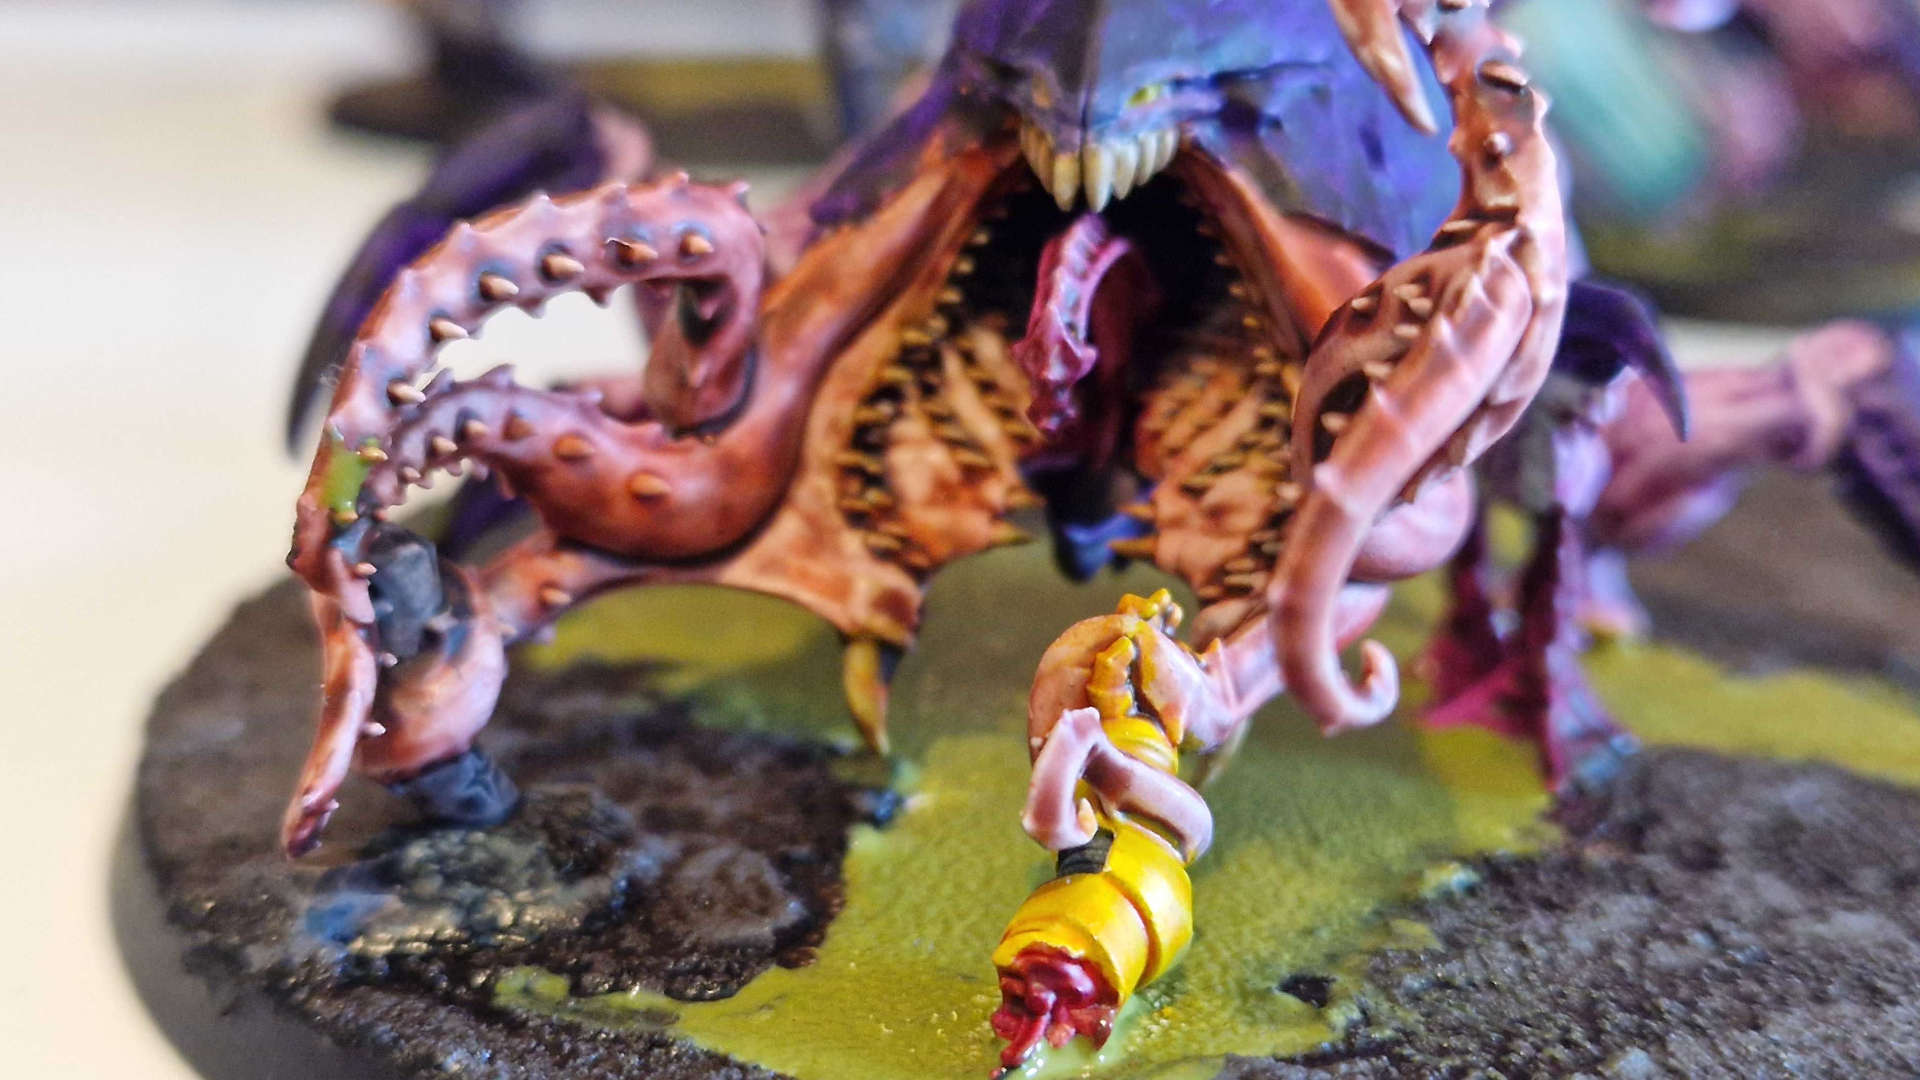 Tyranid Screamer-killer 10th Edition Leviathan Painted Miniature for Sale,  Warhammer 40k and Age of Sigmar Miniature Commission Painting 